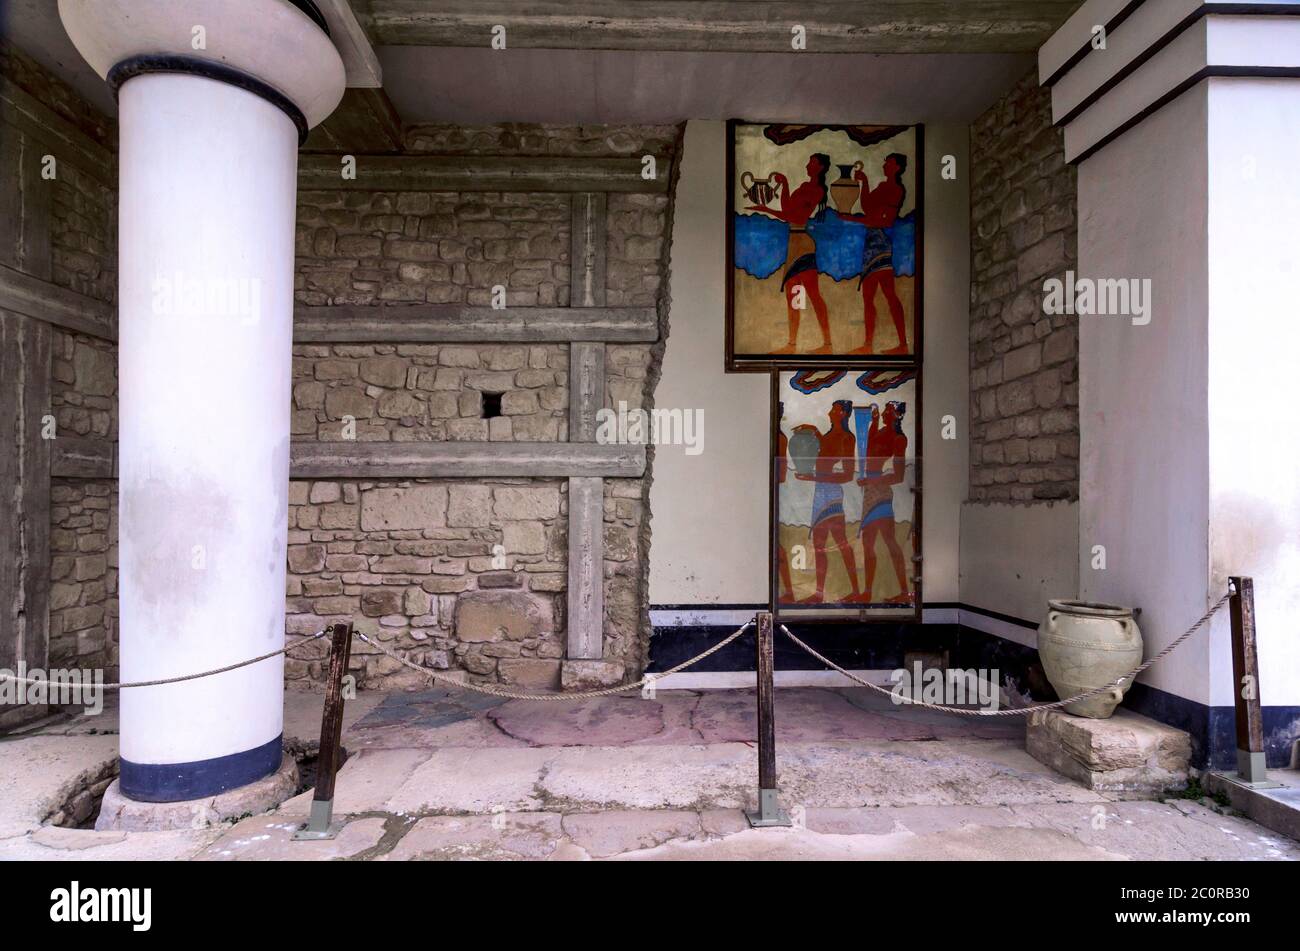 Knossos Palace, Crete / Greece. The South Propylaeum at the archaeological site of Knossos with the two frescoes Stock Photo